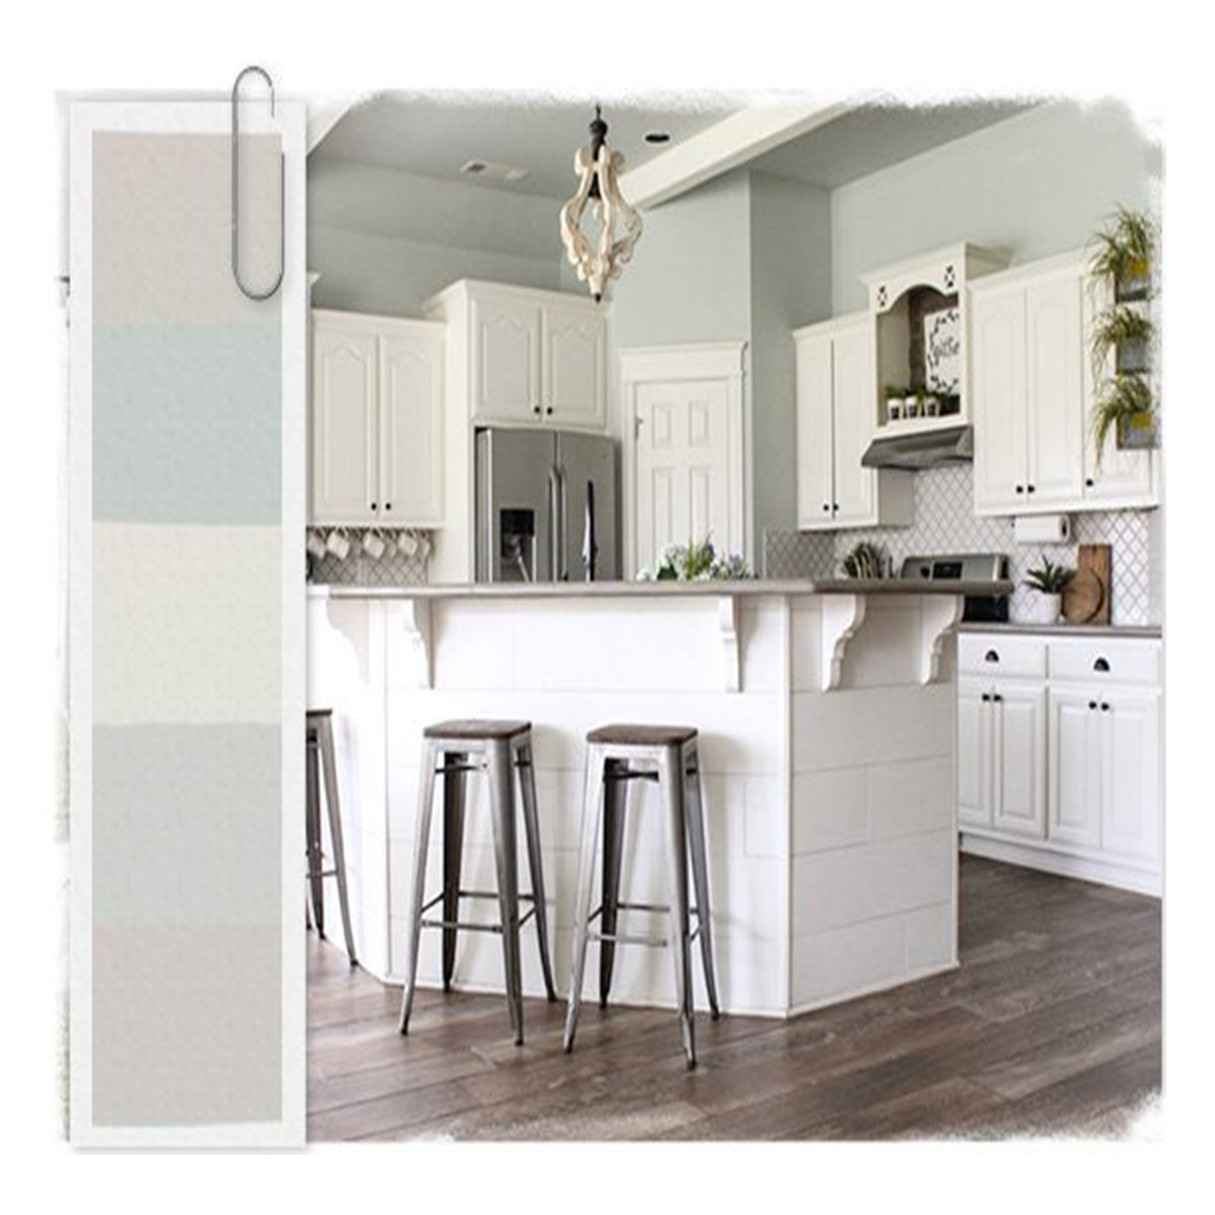 Kitchen Wall Colors 2020
 The Most Popular Farmhouse Paint Colors of 2019 Decor